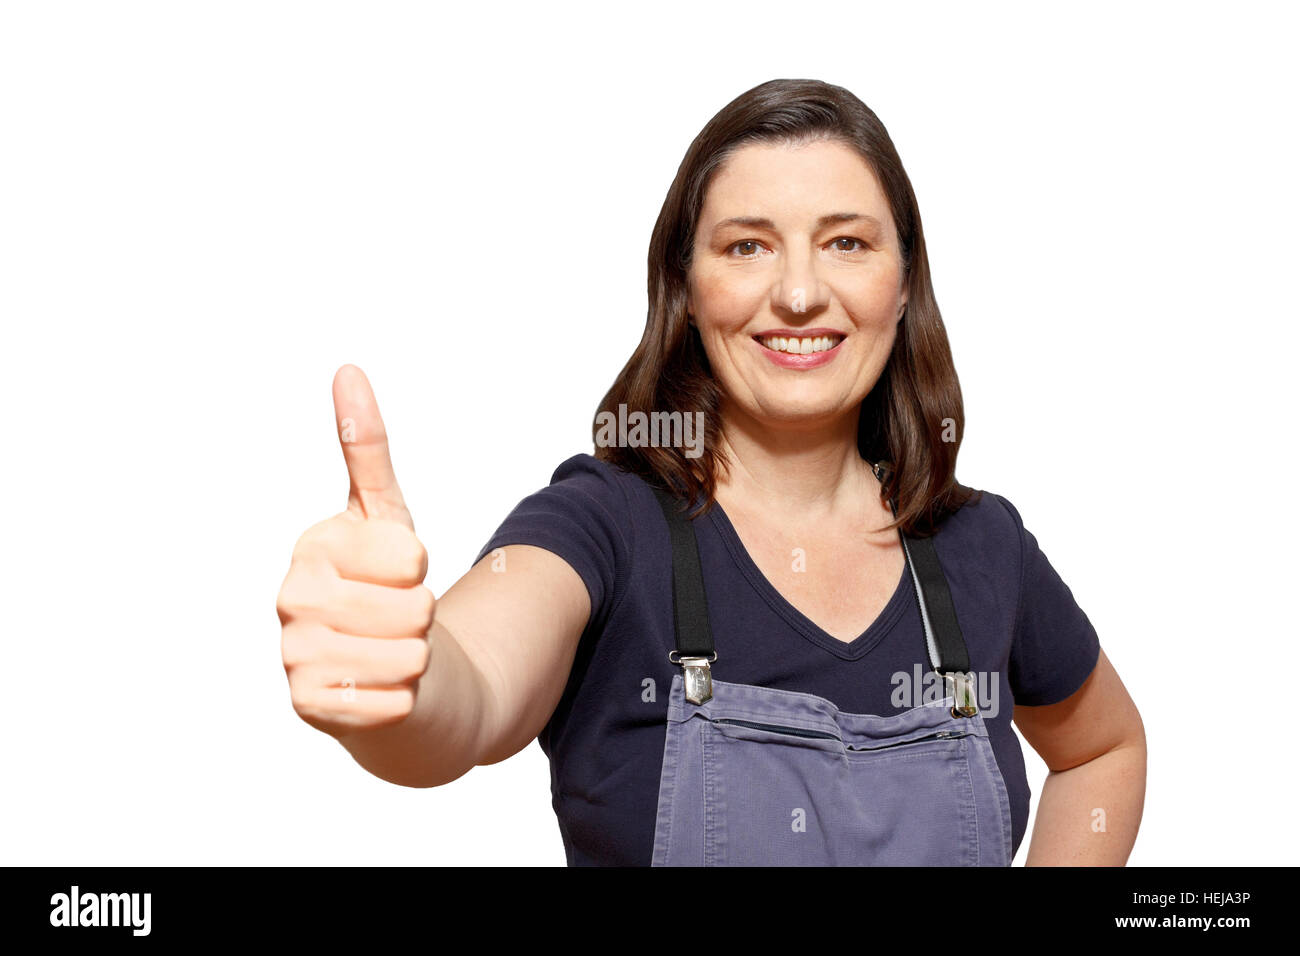 Middle aged saleswoman of a hardware shop wearing dungarees and showing the thumbs up sign, isolated on white, copy space, copyspace Stock Photo